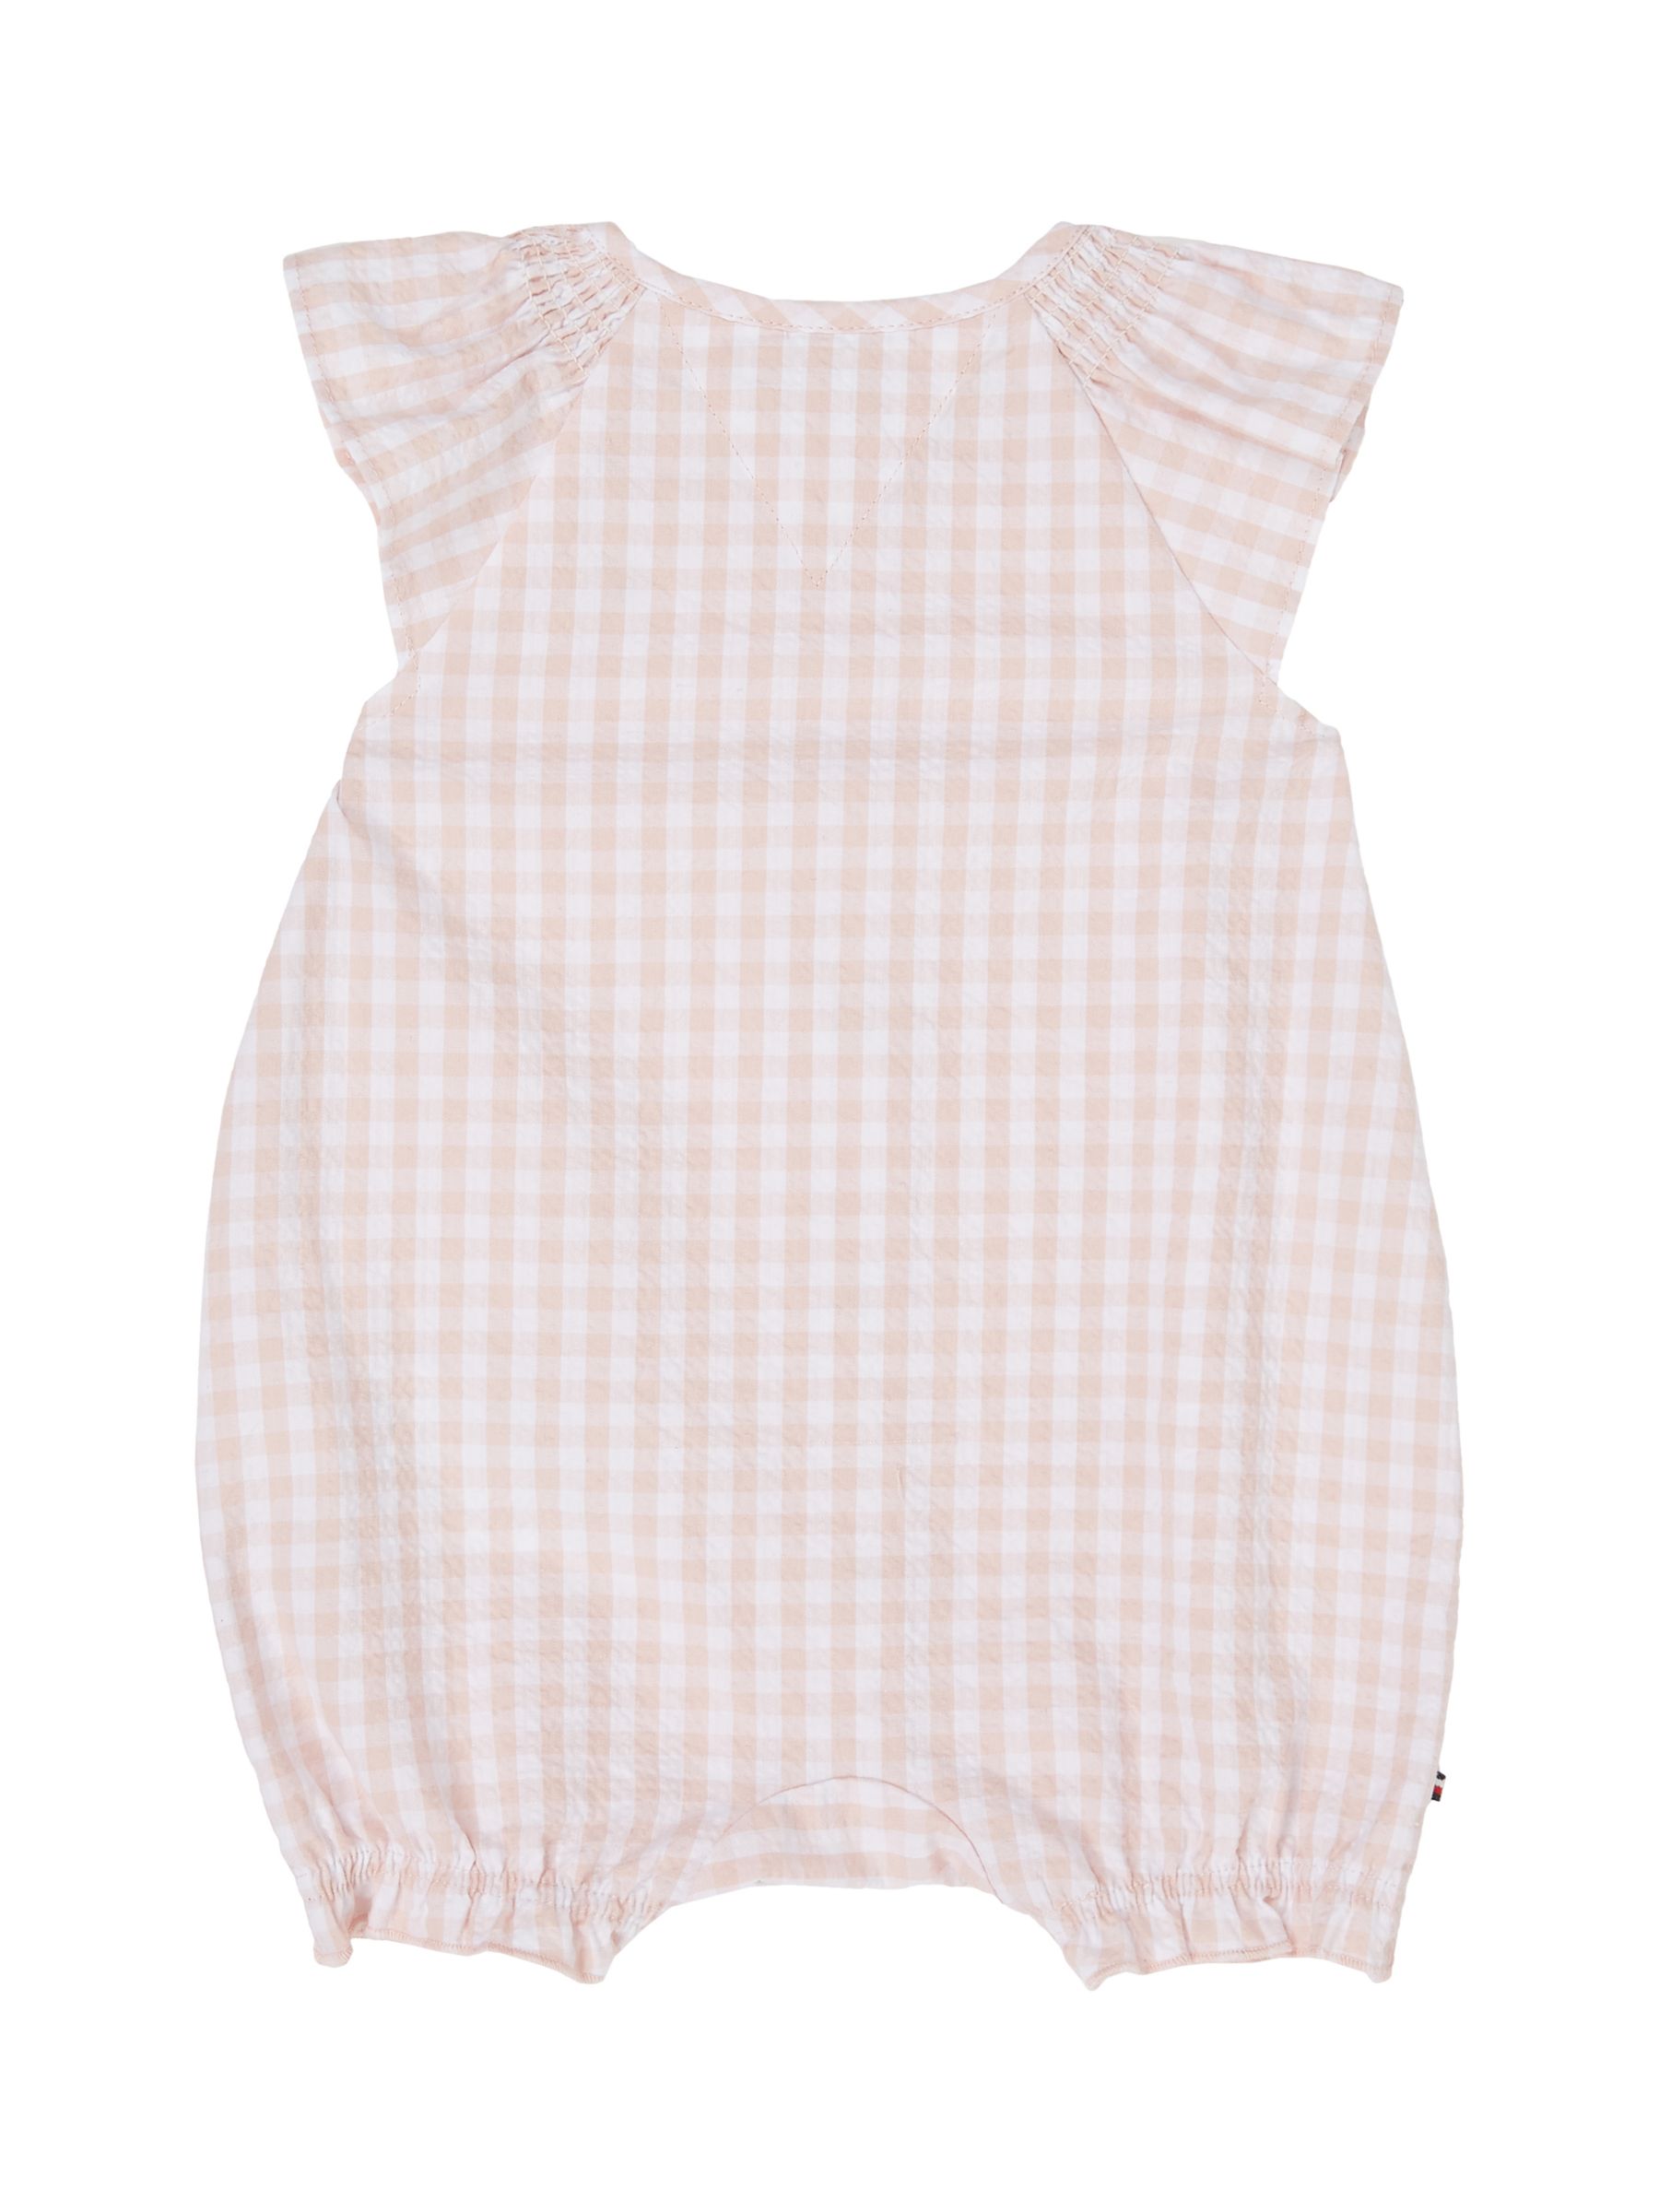 Tommy Hilfiger Baby Flag Logo Gingham Shortall, White/Pink, 0-3 months